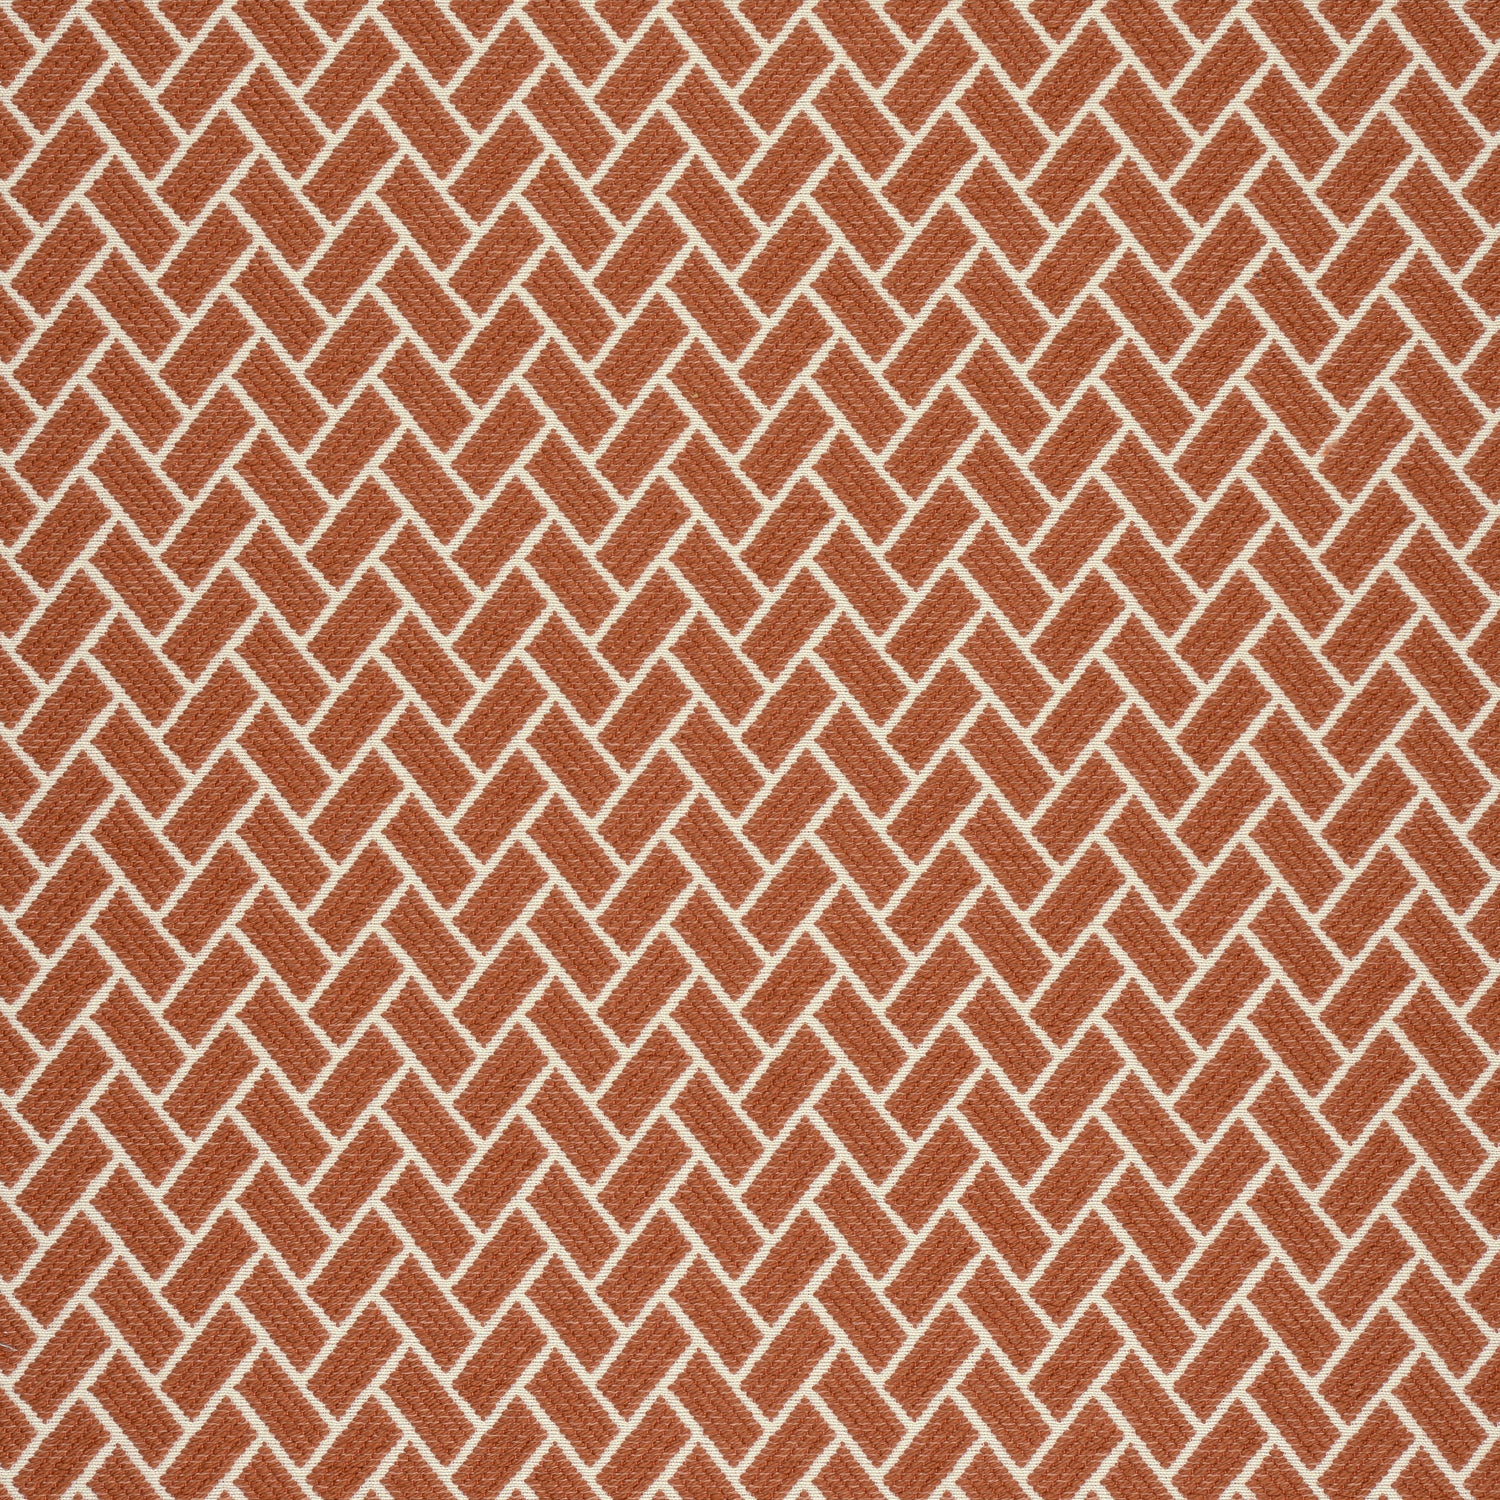 Cobblestone fabric in copper color - pattern number W74226 - by Thibaut in the Passage collection